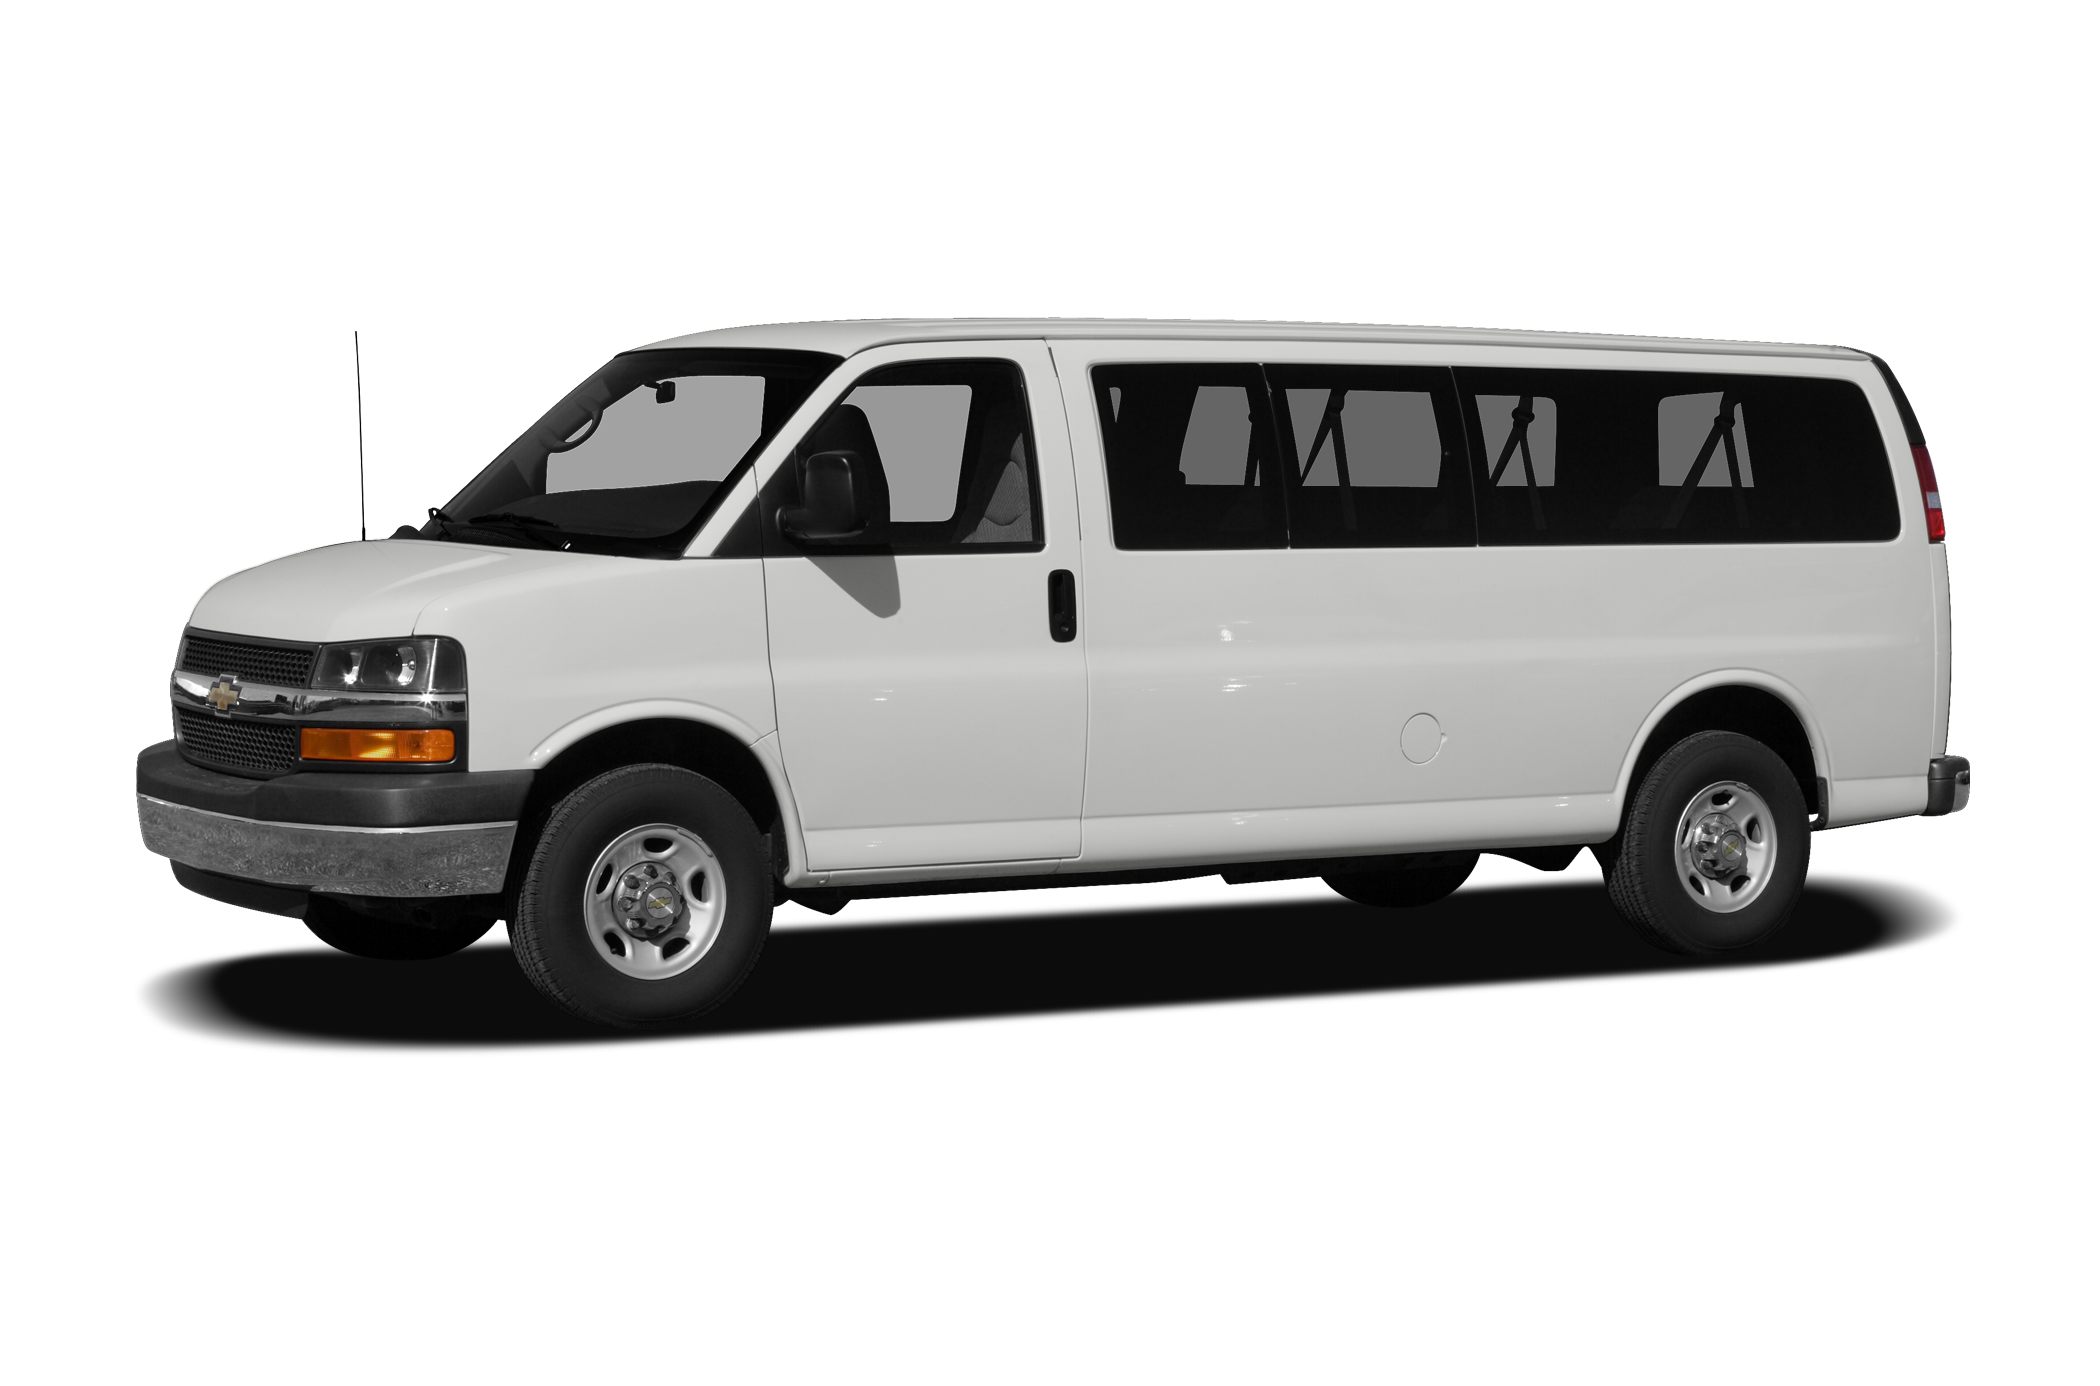 2006 Chevrolet Express LS Rear-wheel Drive G3500 Extended Passenger Van  Specs and Prices